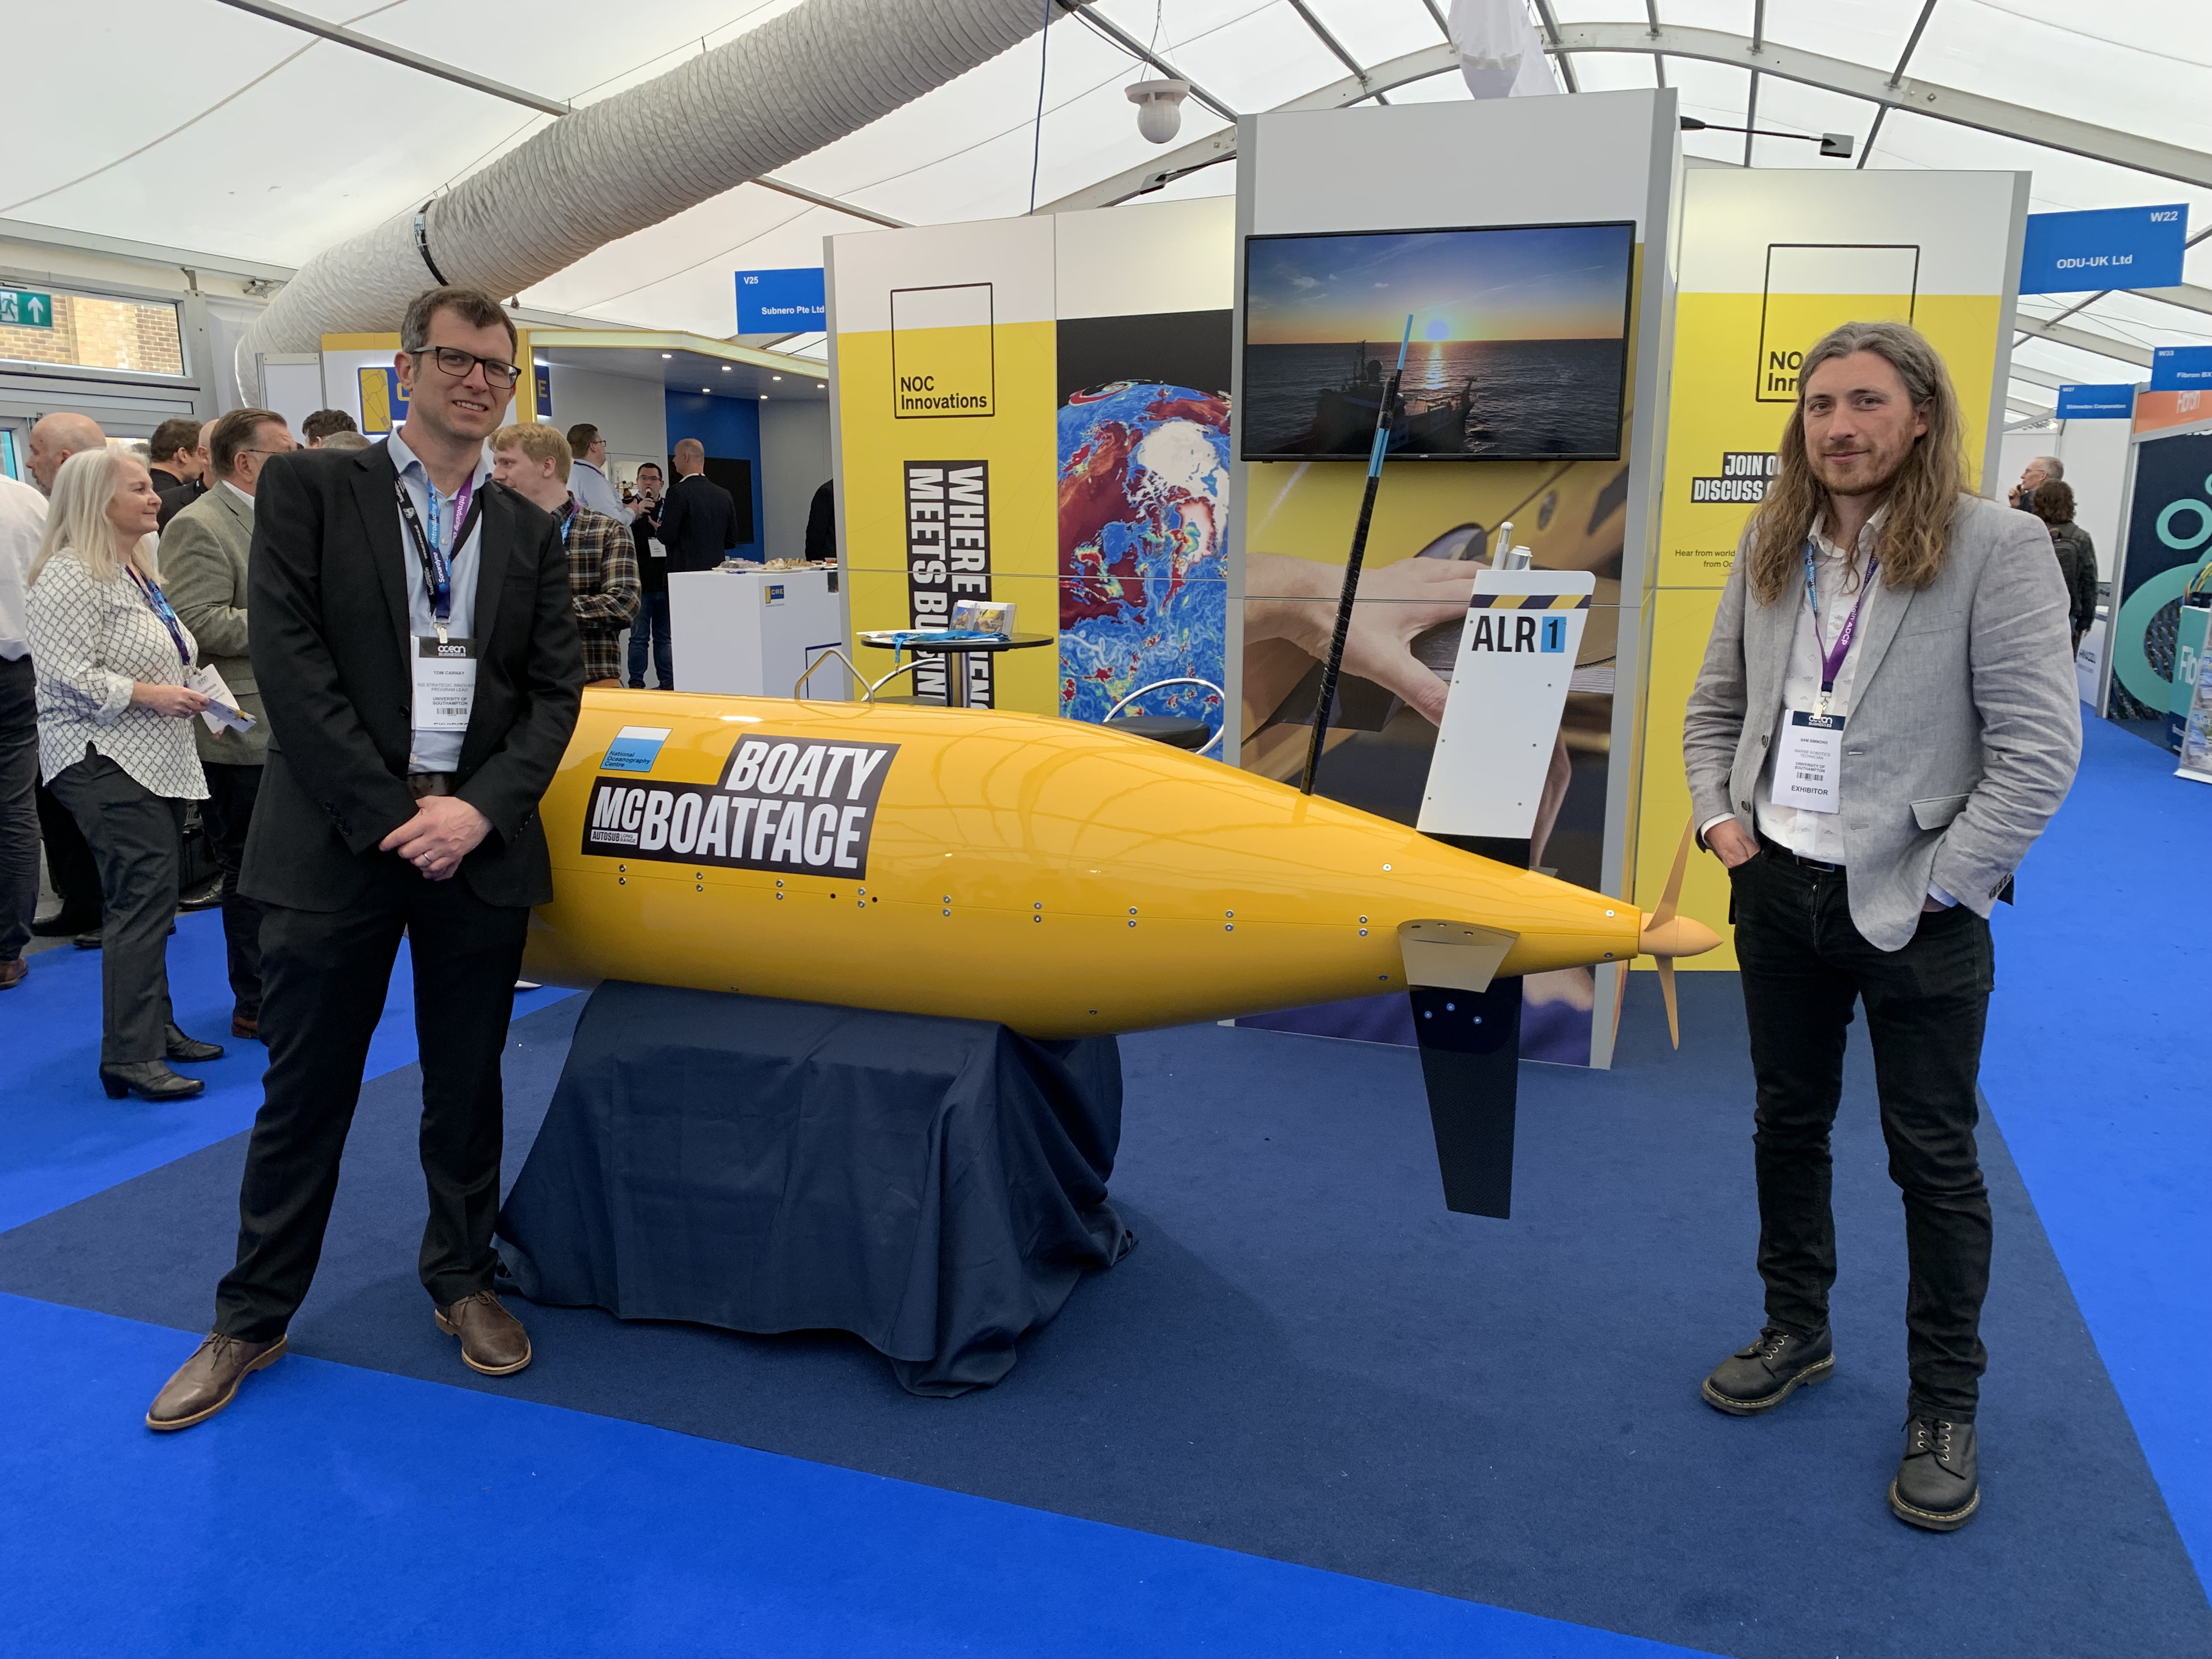 Tom Carnay and Sam Simmons at the NOC Innovations stand with Boaty McBoatface